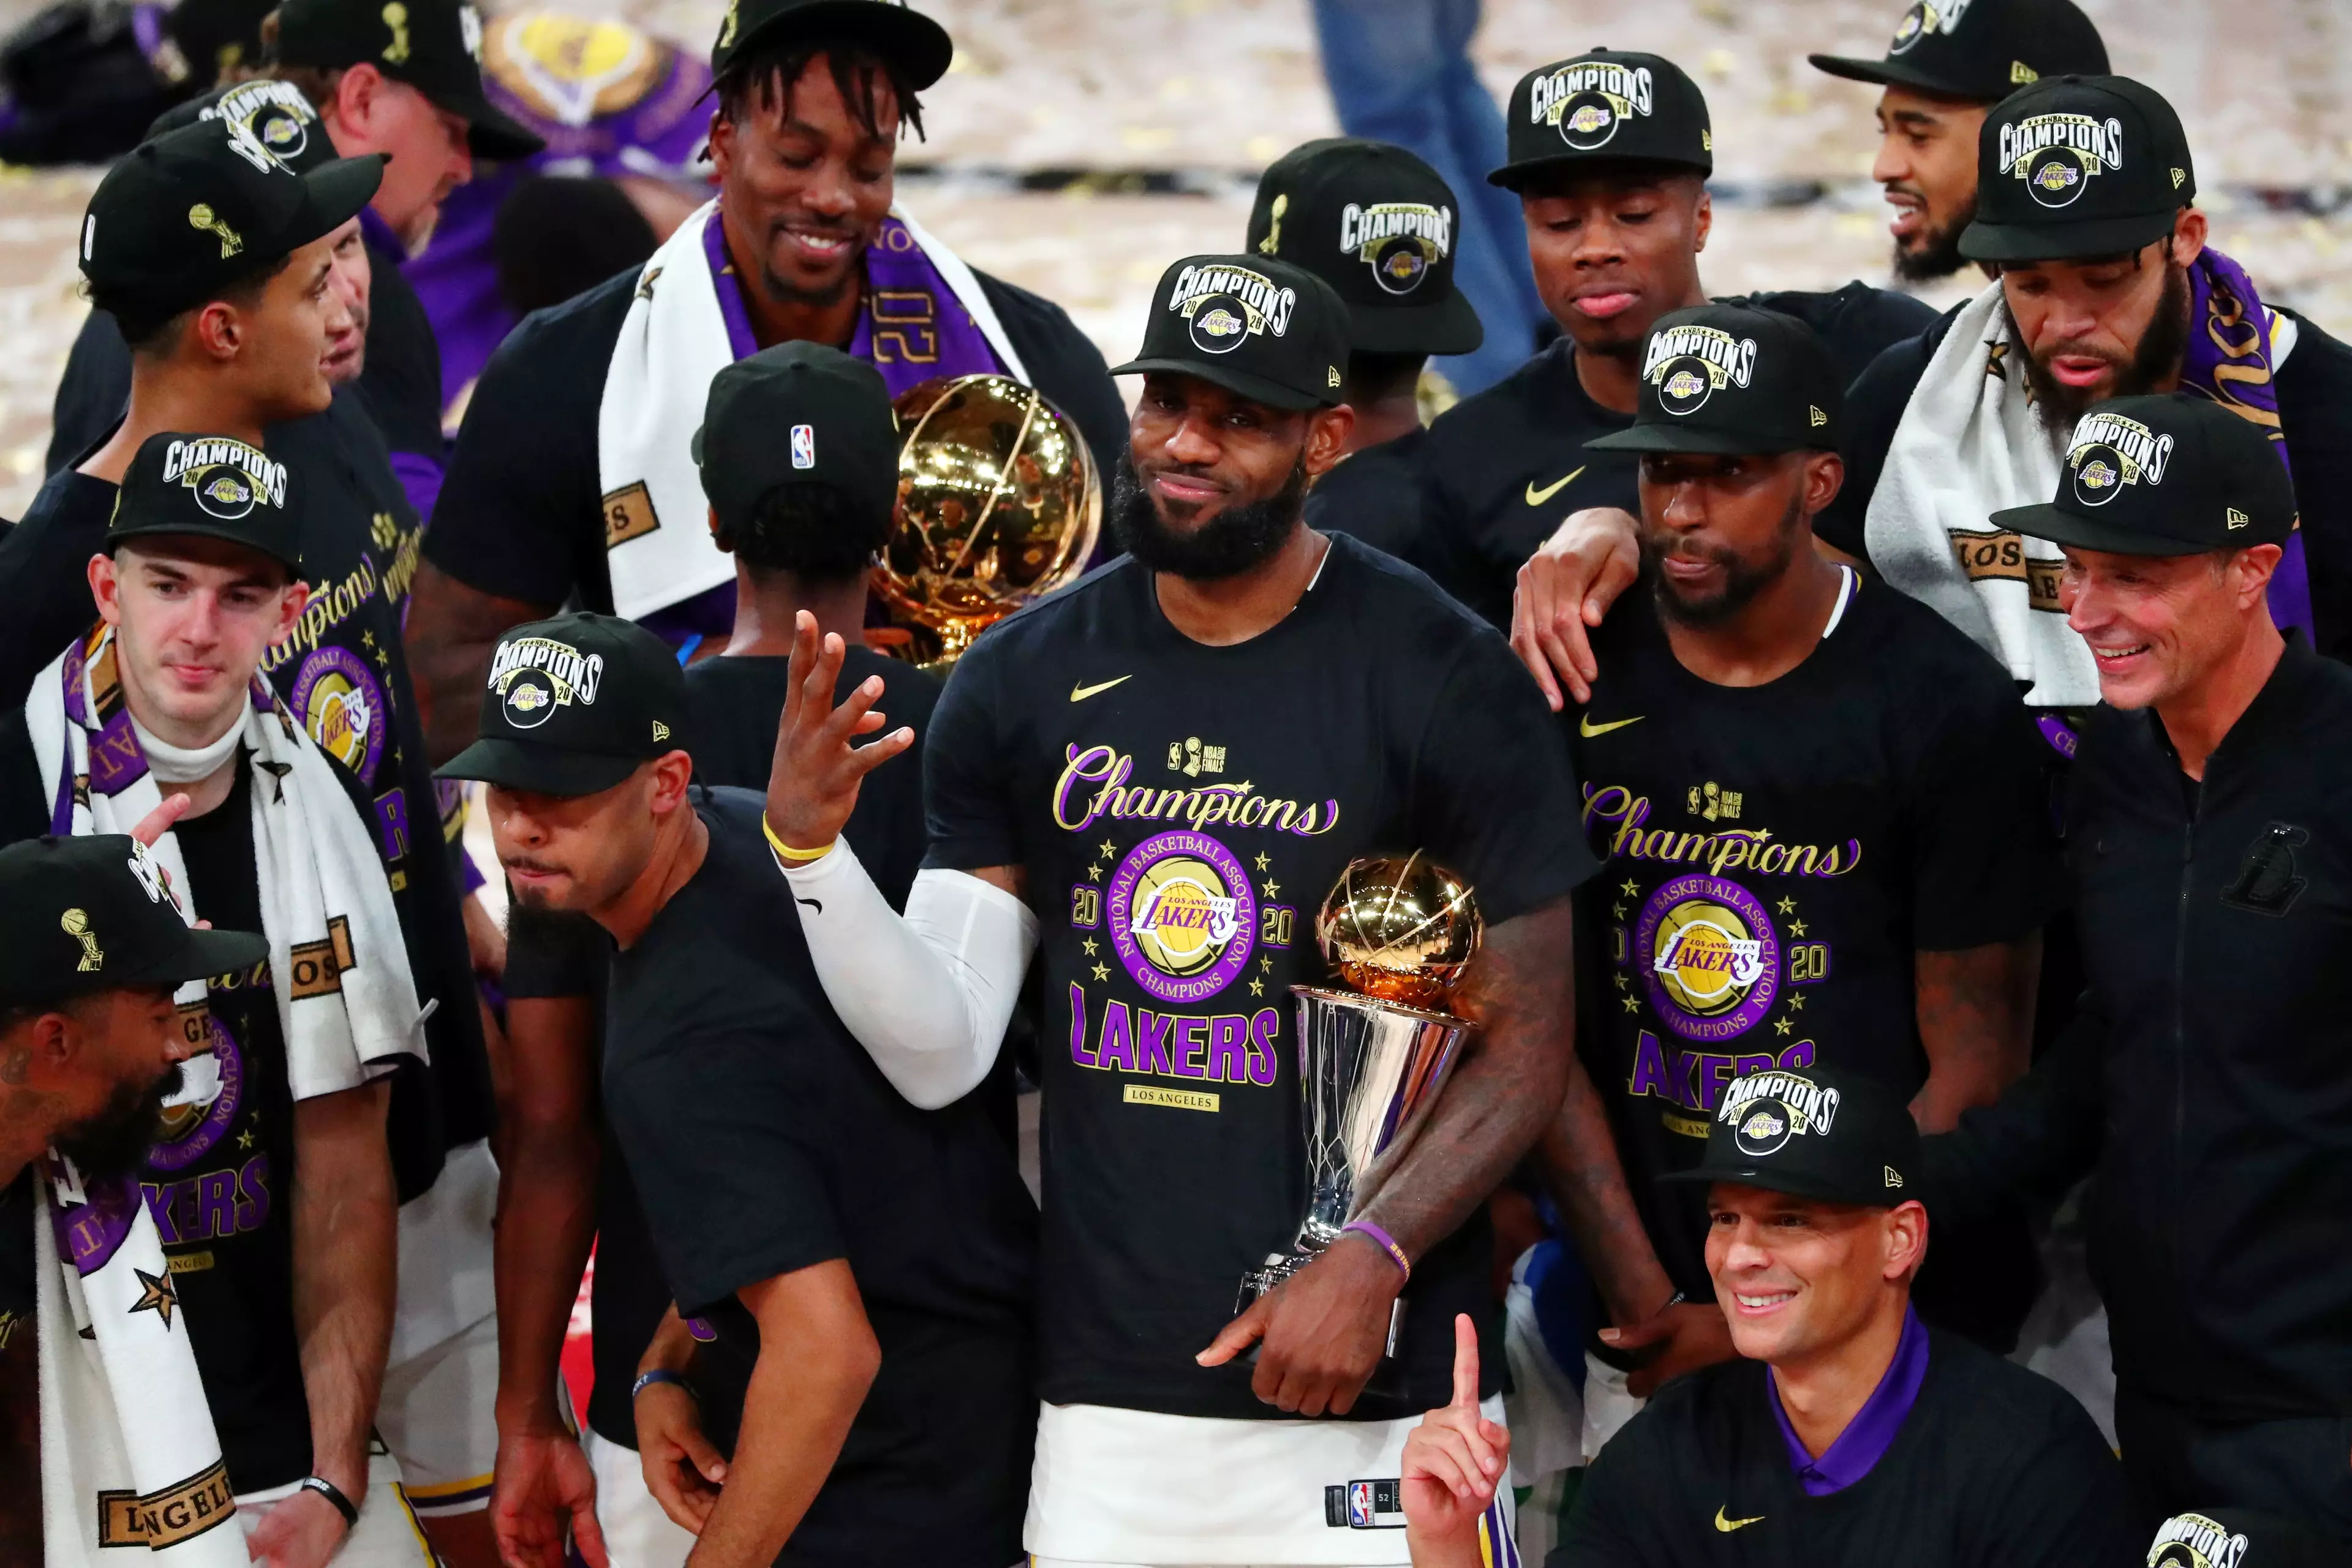 Los Angeles Lakers star LeBron James recently won his fourth NBA Championship.